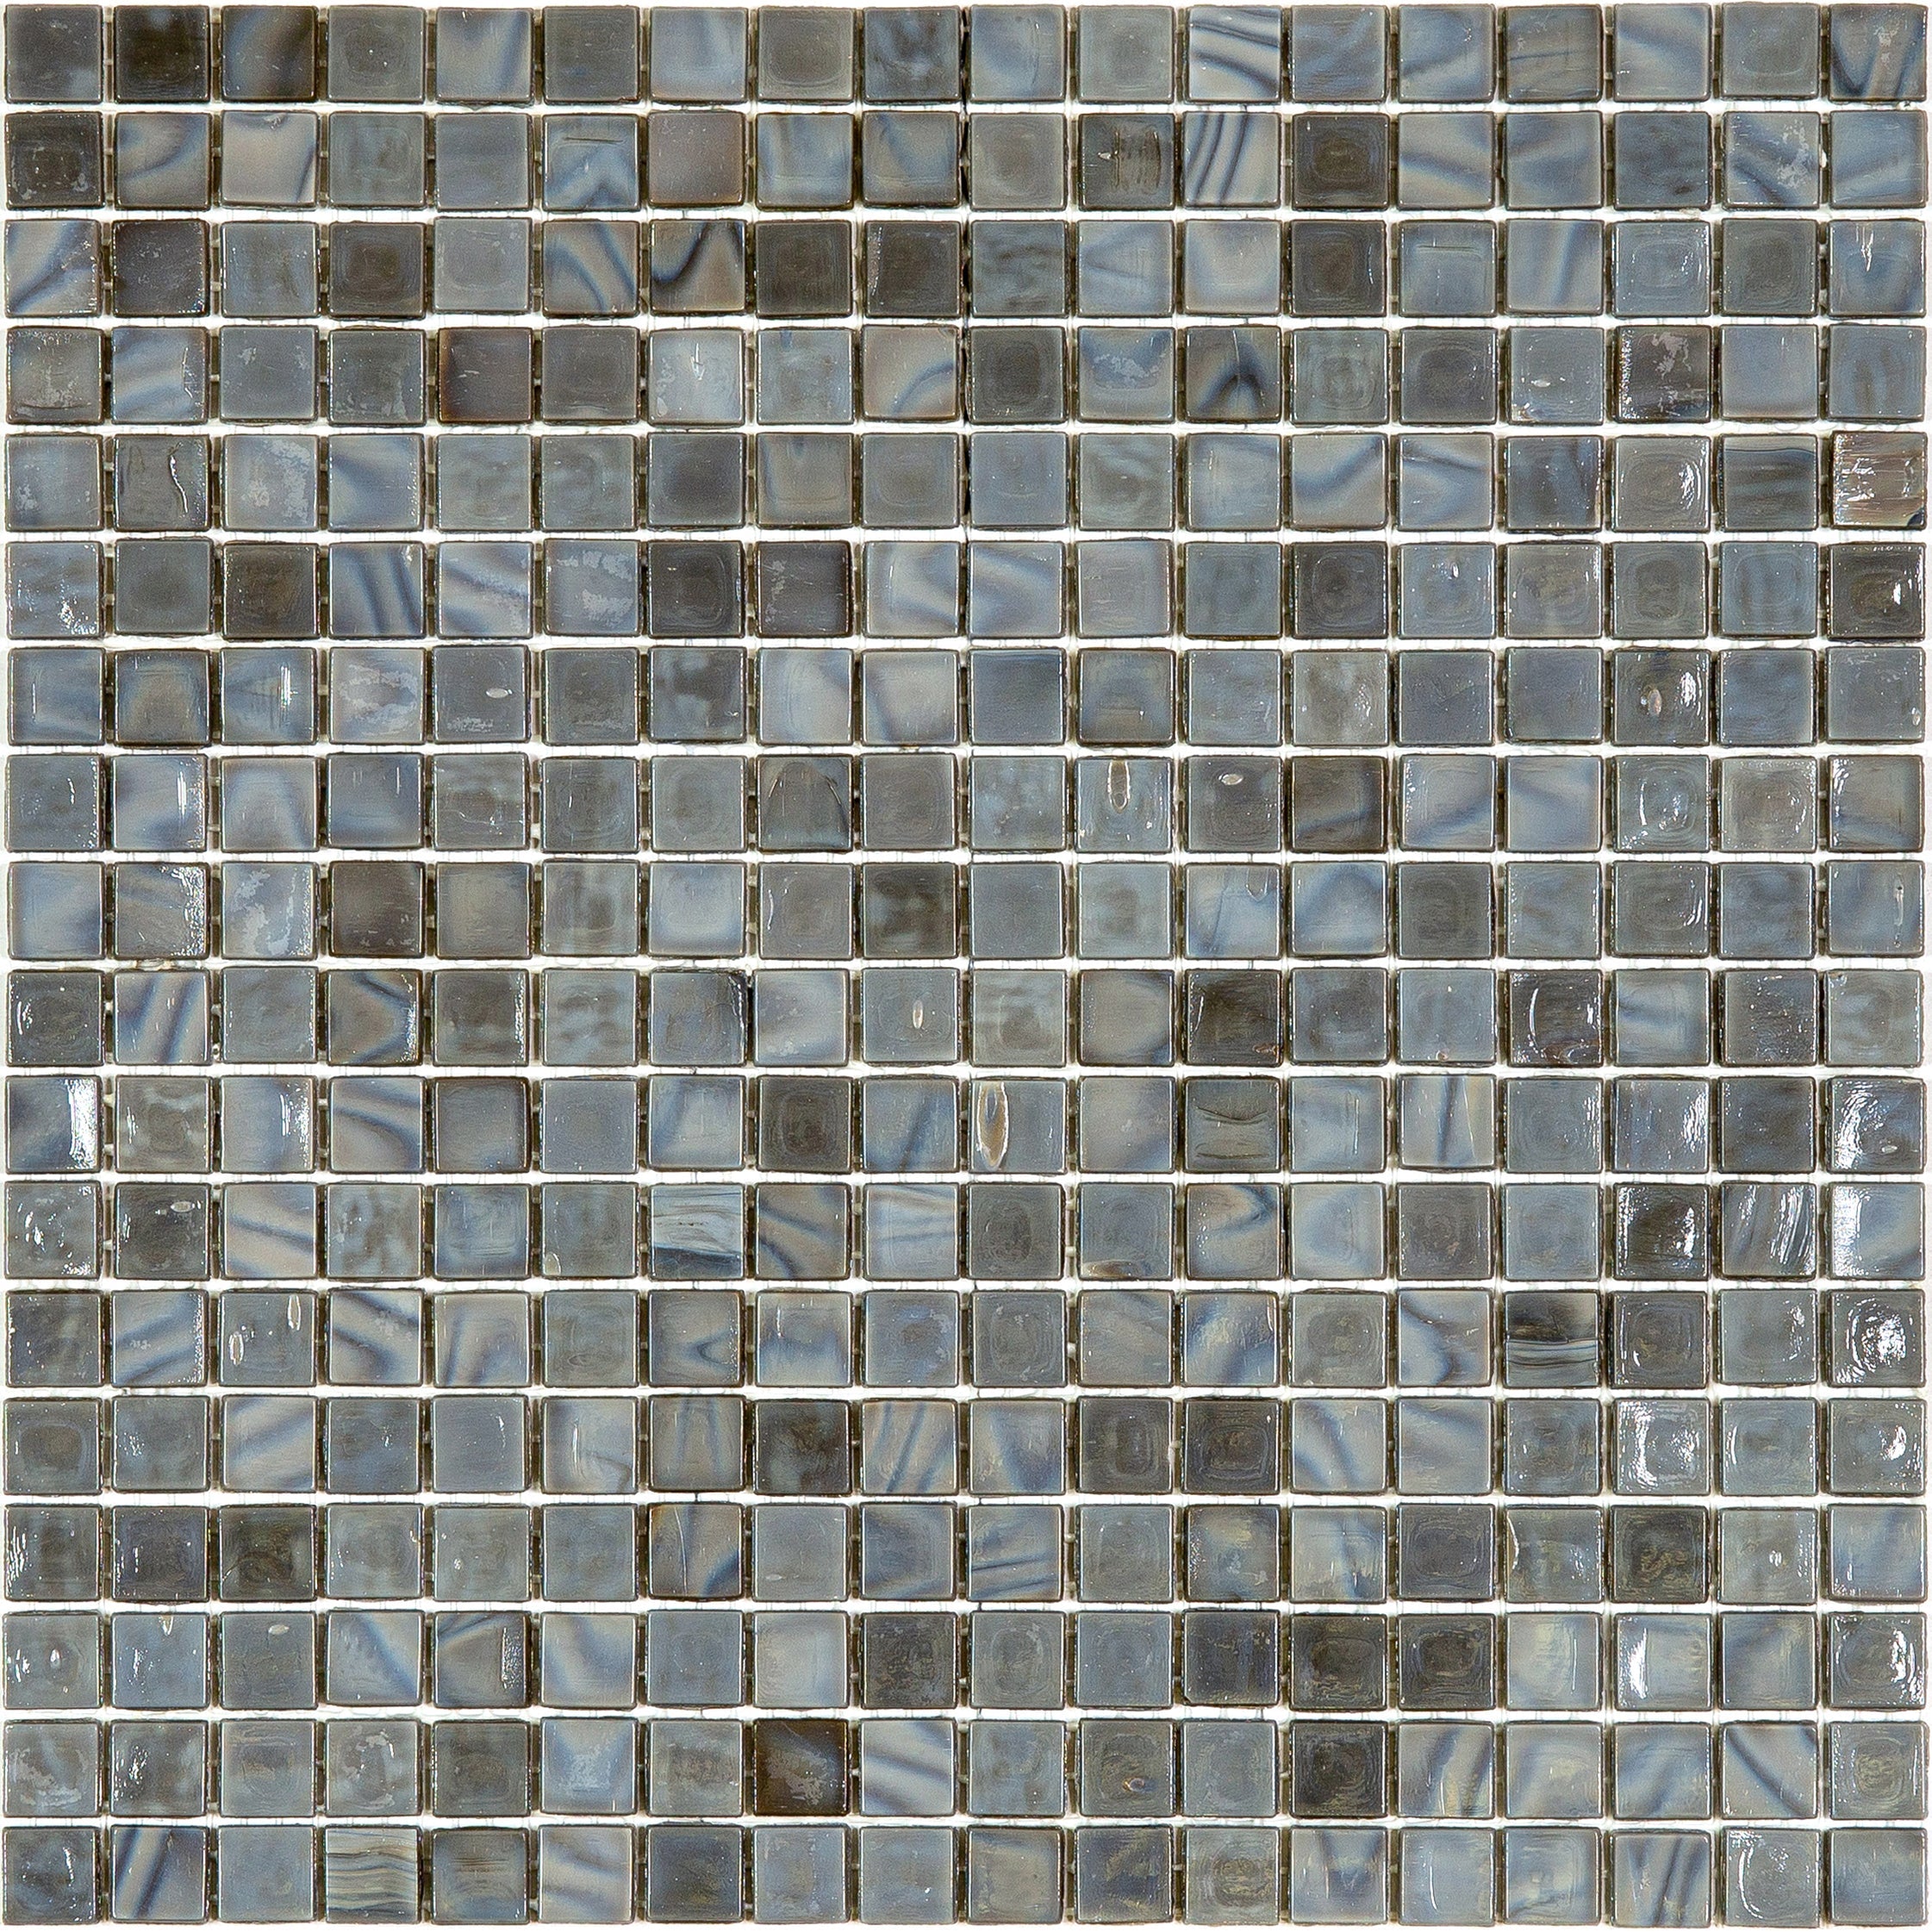 mir alma solid colors 0_6 inch nibble nc0212 wall and floor mosaic distributed by surface group natural materials